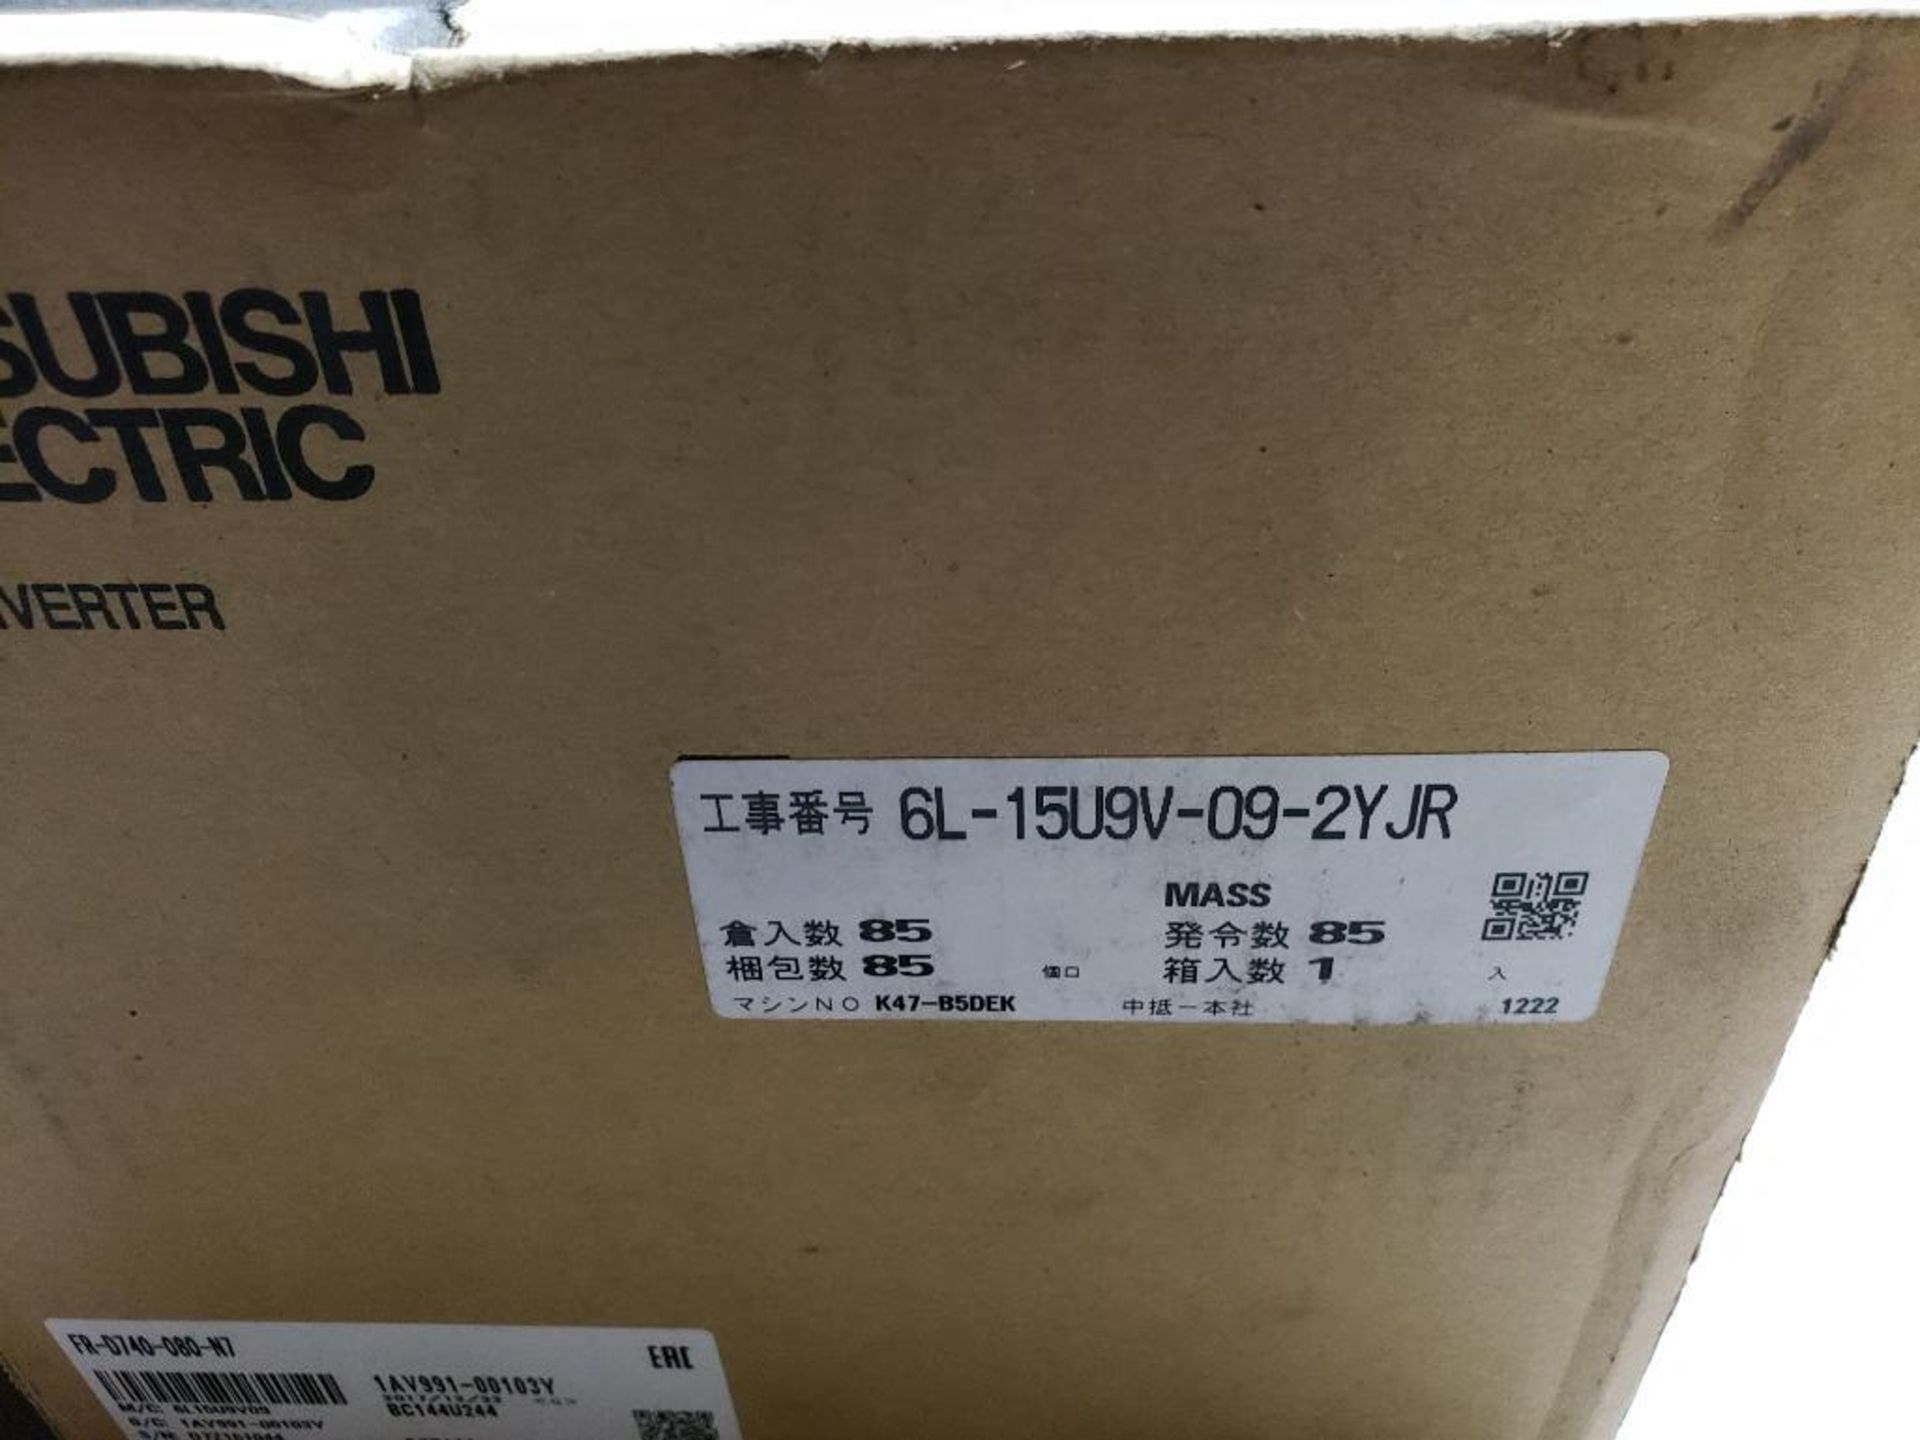 Mitsubishi inverter drive. Part number FR-D740-080-N7. New in box. - Image 4 of 7